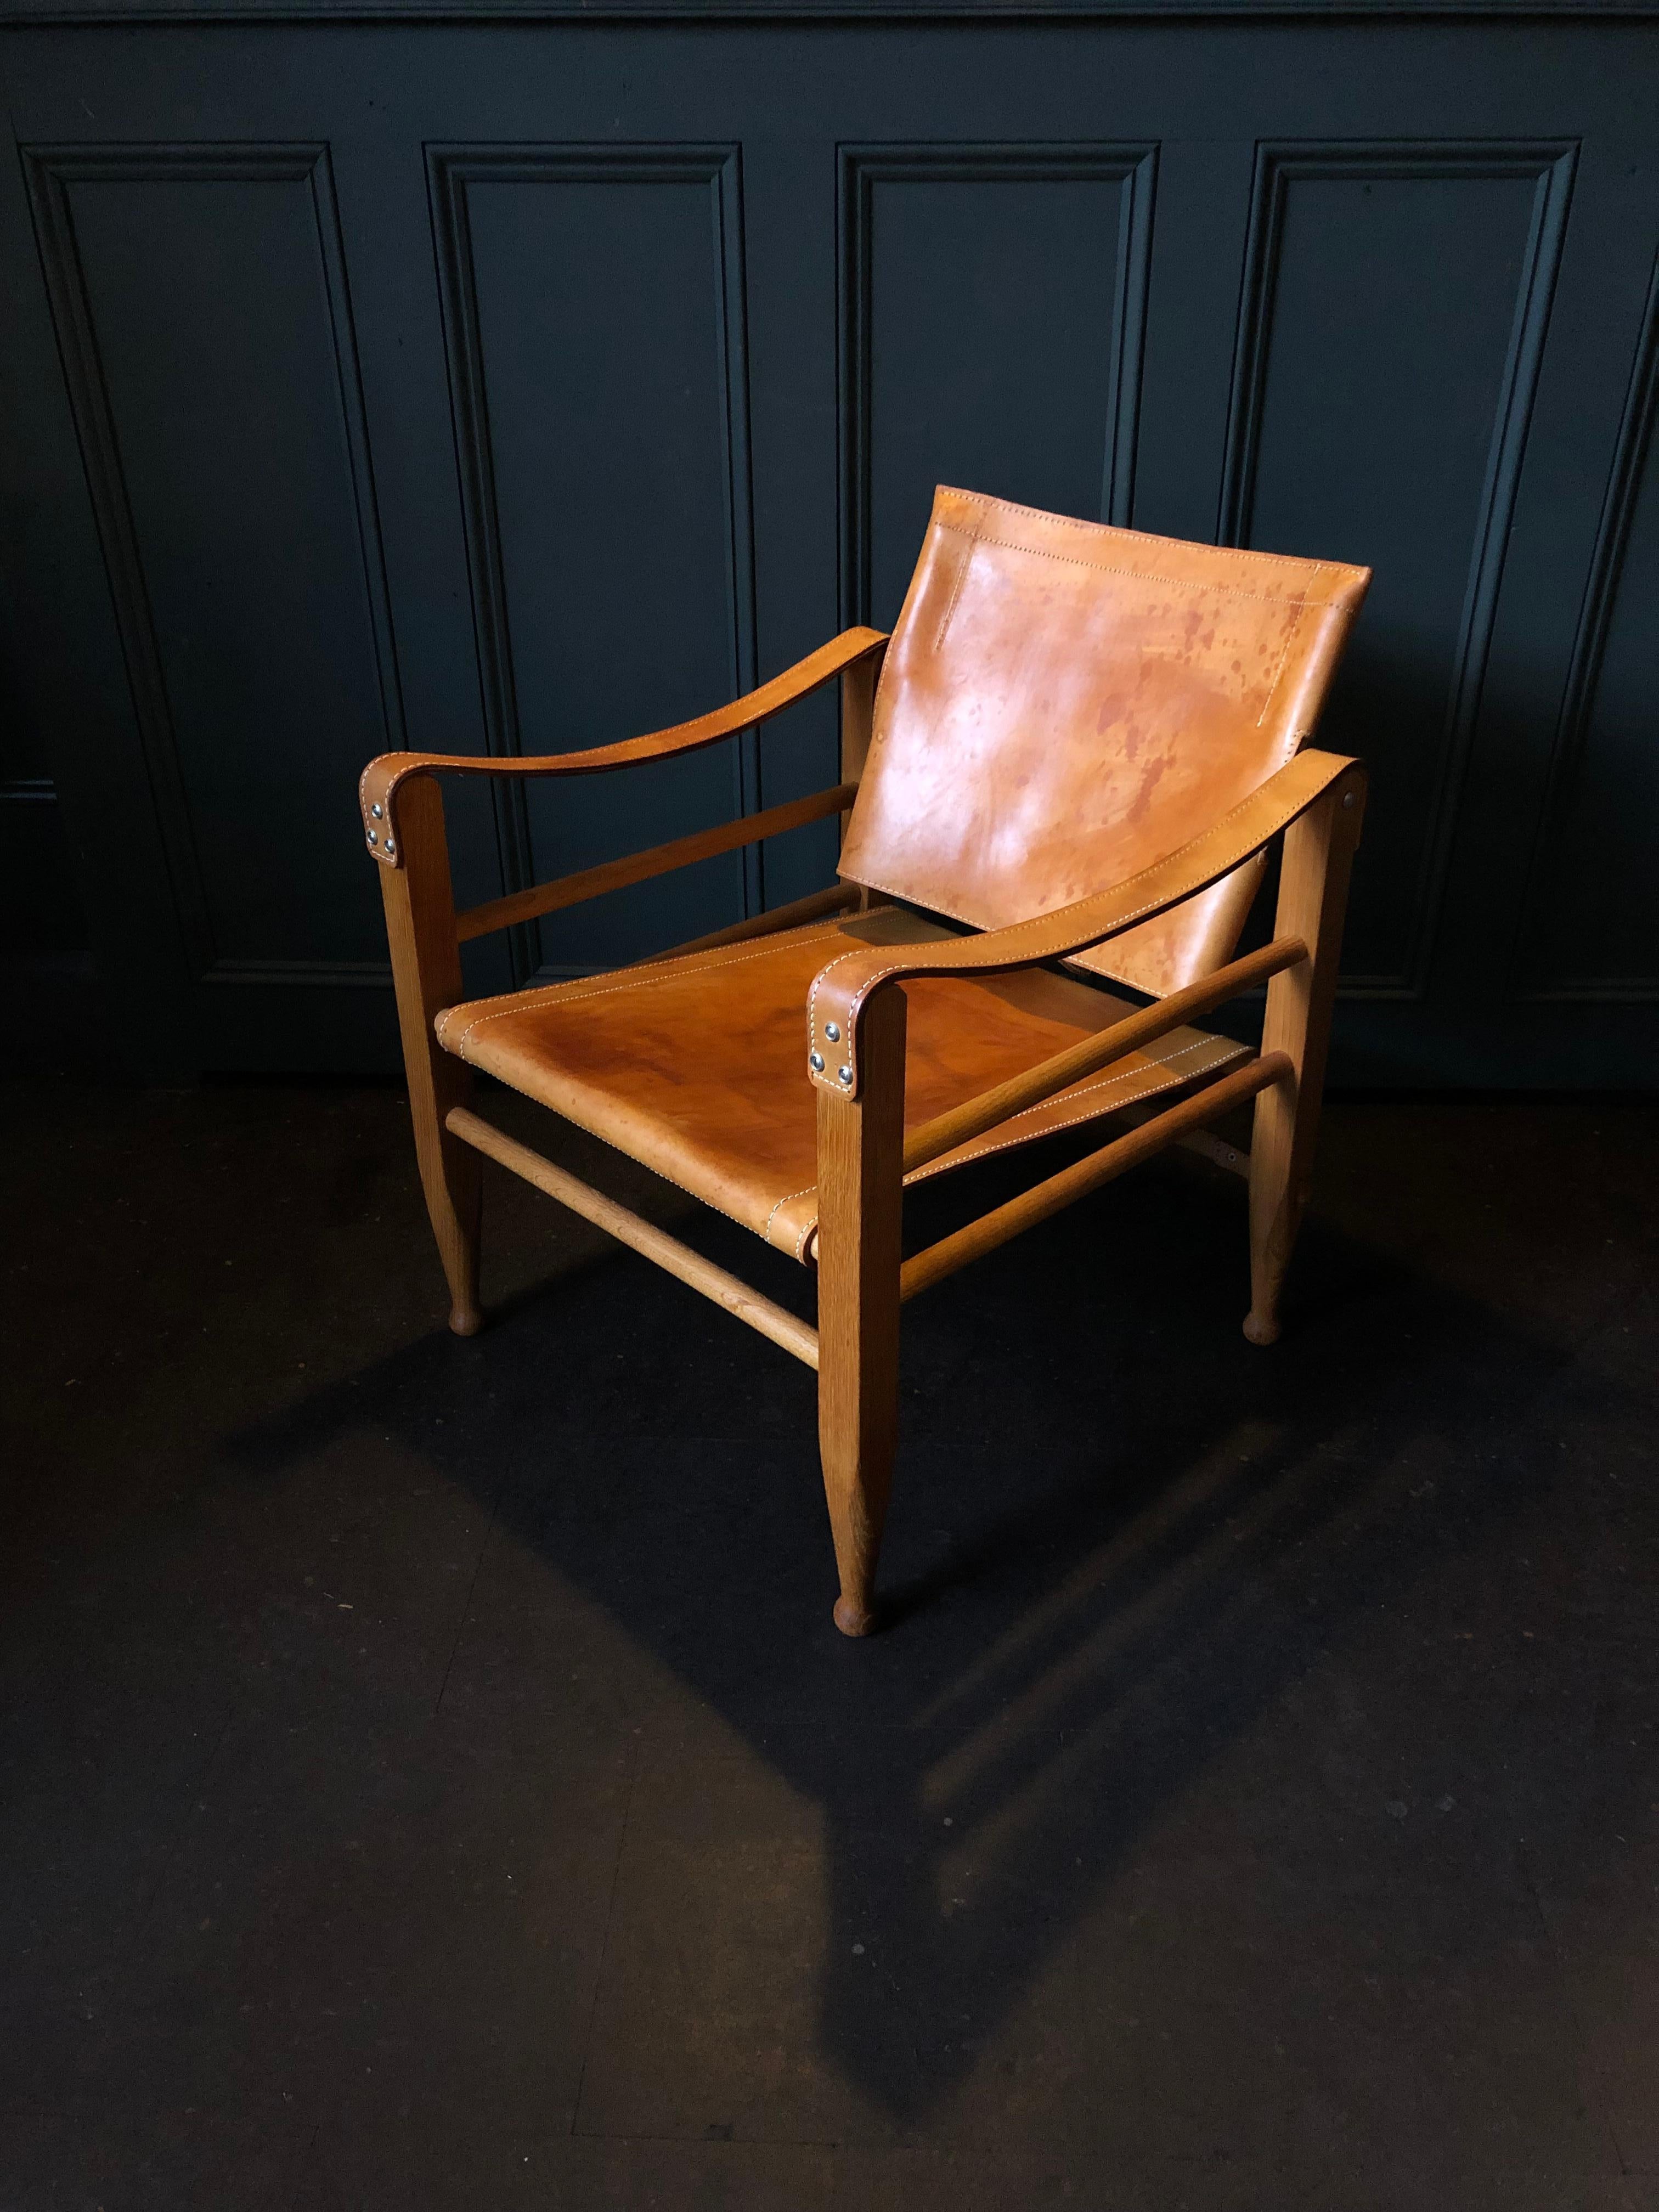 Hand-Crafted Pair of Safari Chairs and Table, Aage Bruun & Son, Børge Mogensen